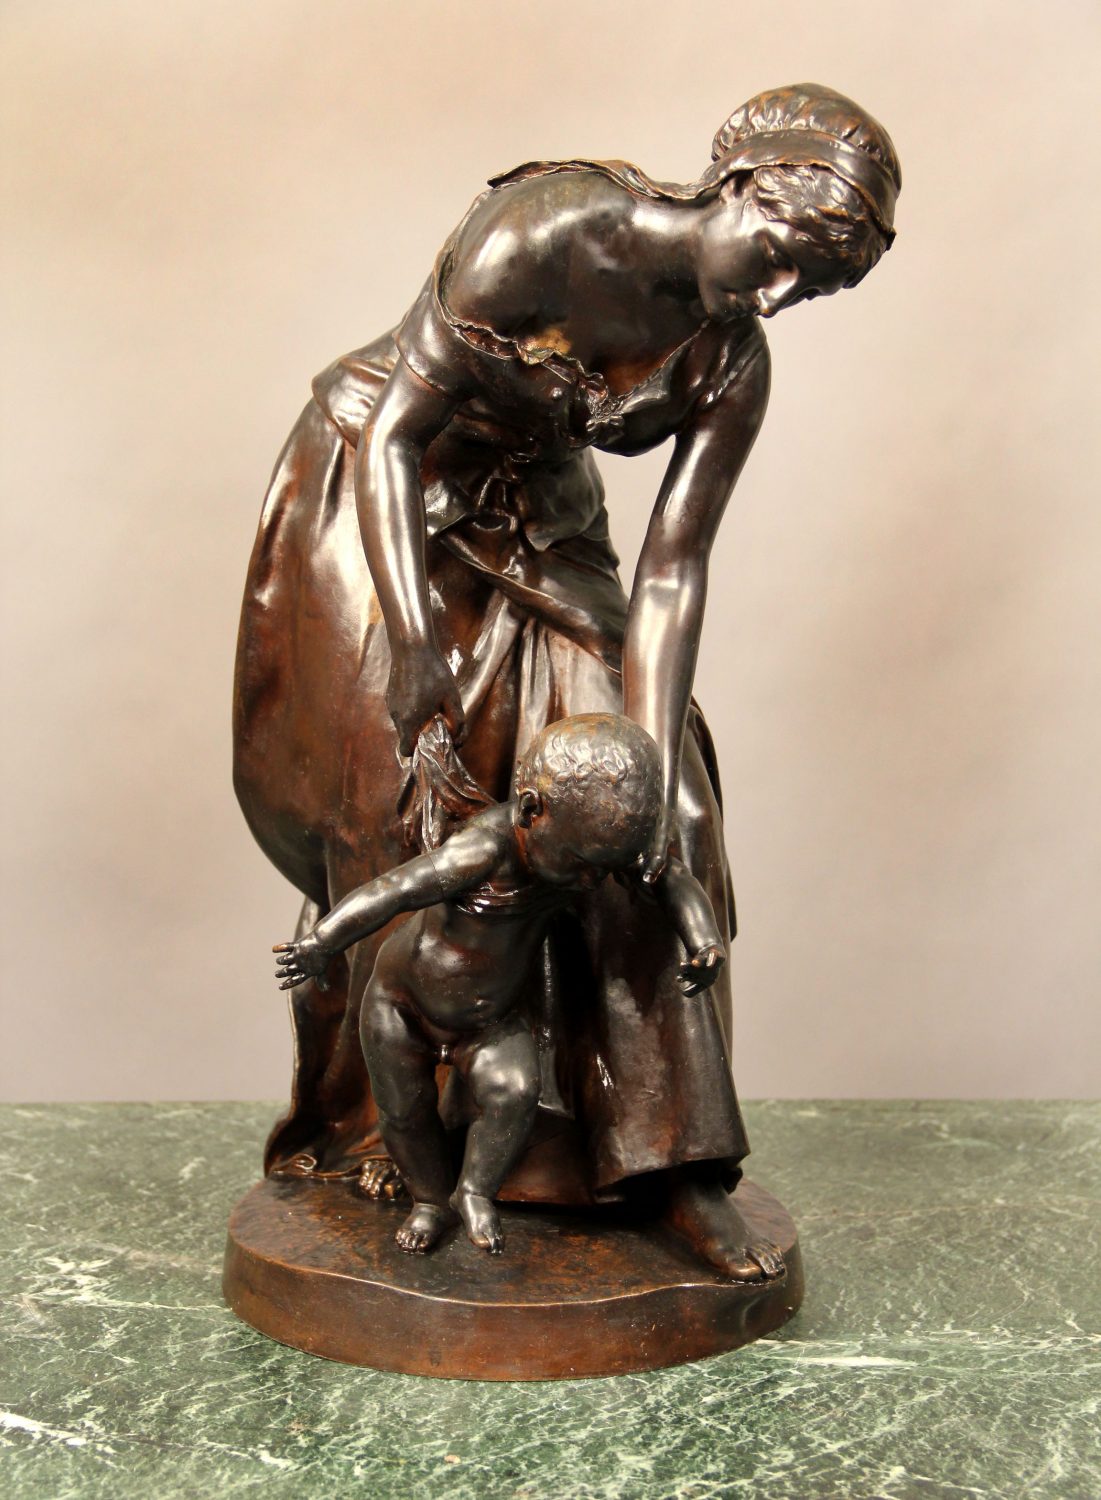 A Late 19th Sculpture of Mother and Child Entitled "Les Premiers Pas" (First Steps) by Henri Plé - Charles Galleries